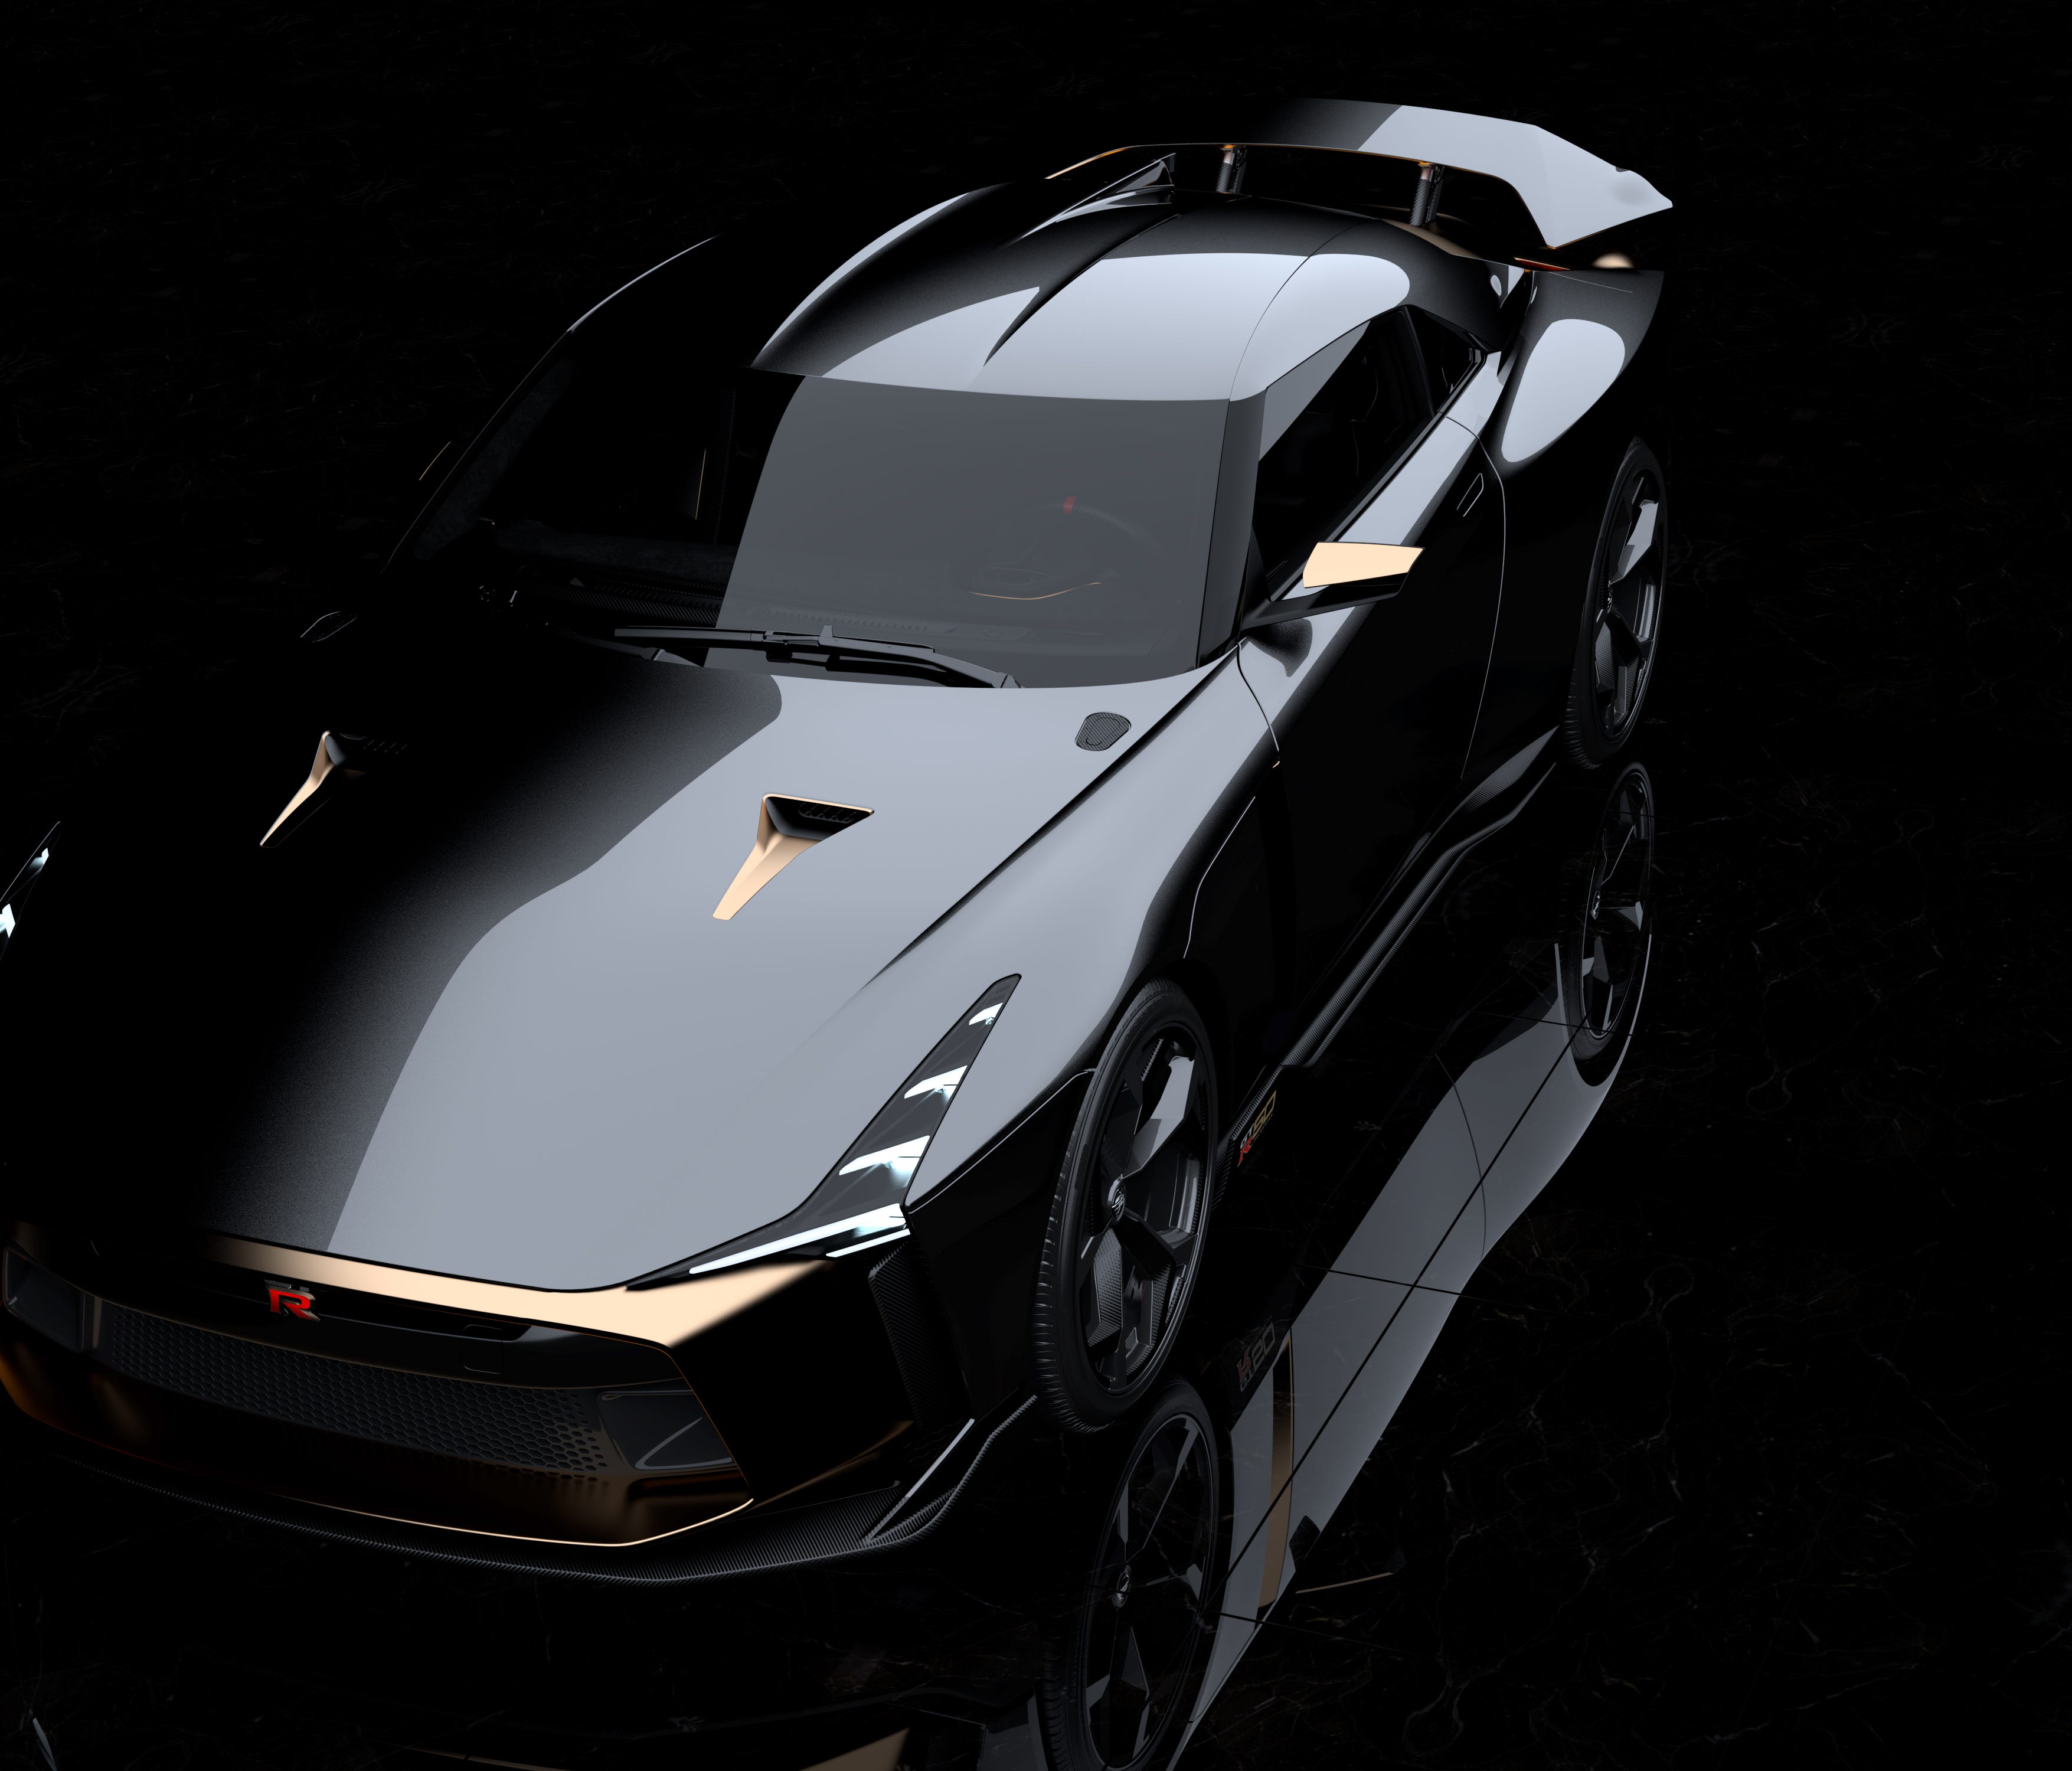 Another view of the 2018 Nissan GT-R NISMO model, the Nissan GT-R50 by Italdesign